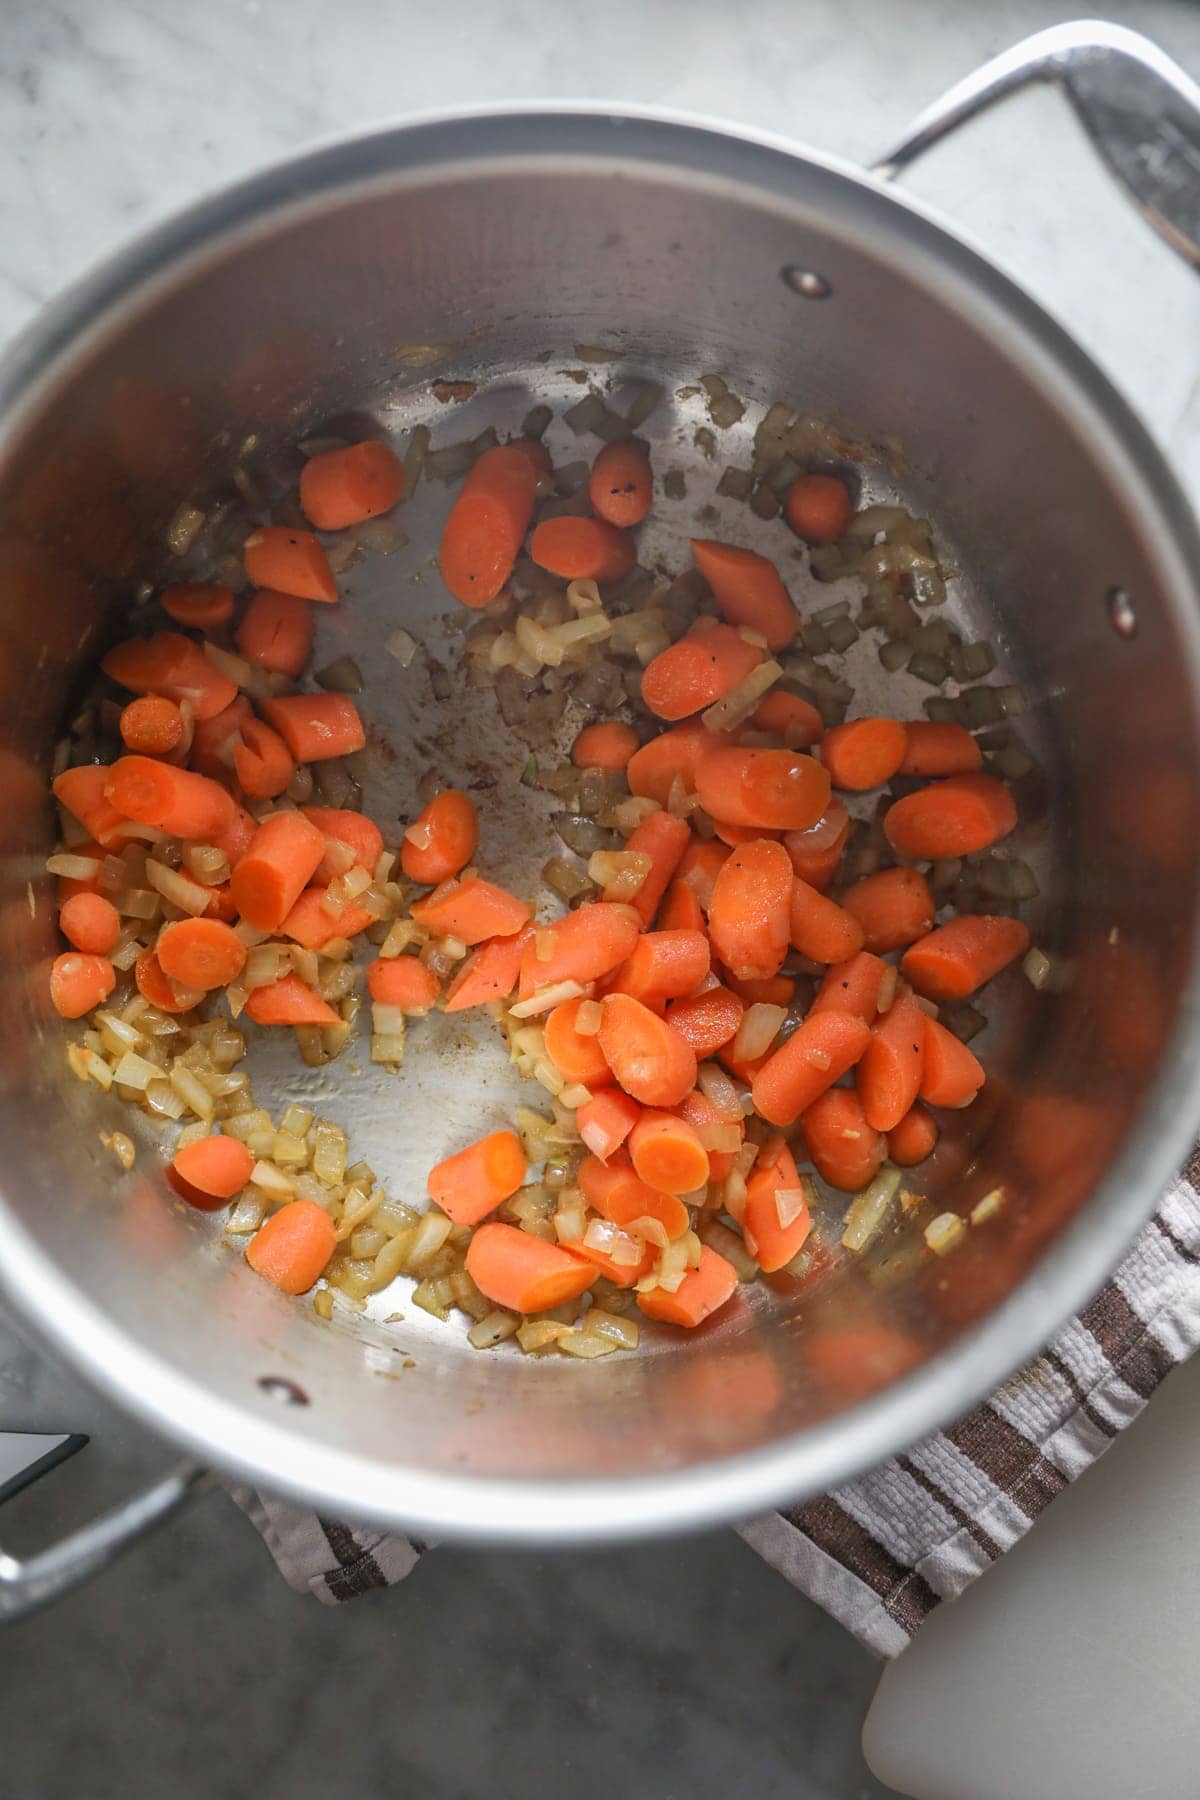 A pot on the stove of onions and carrots